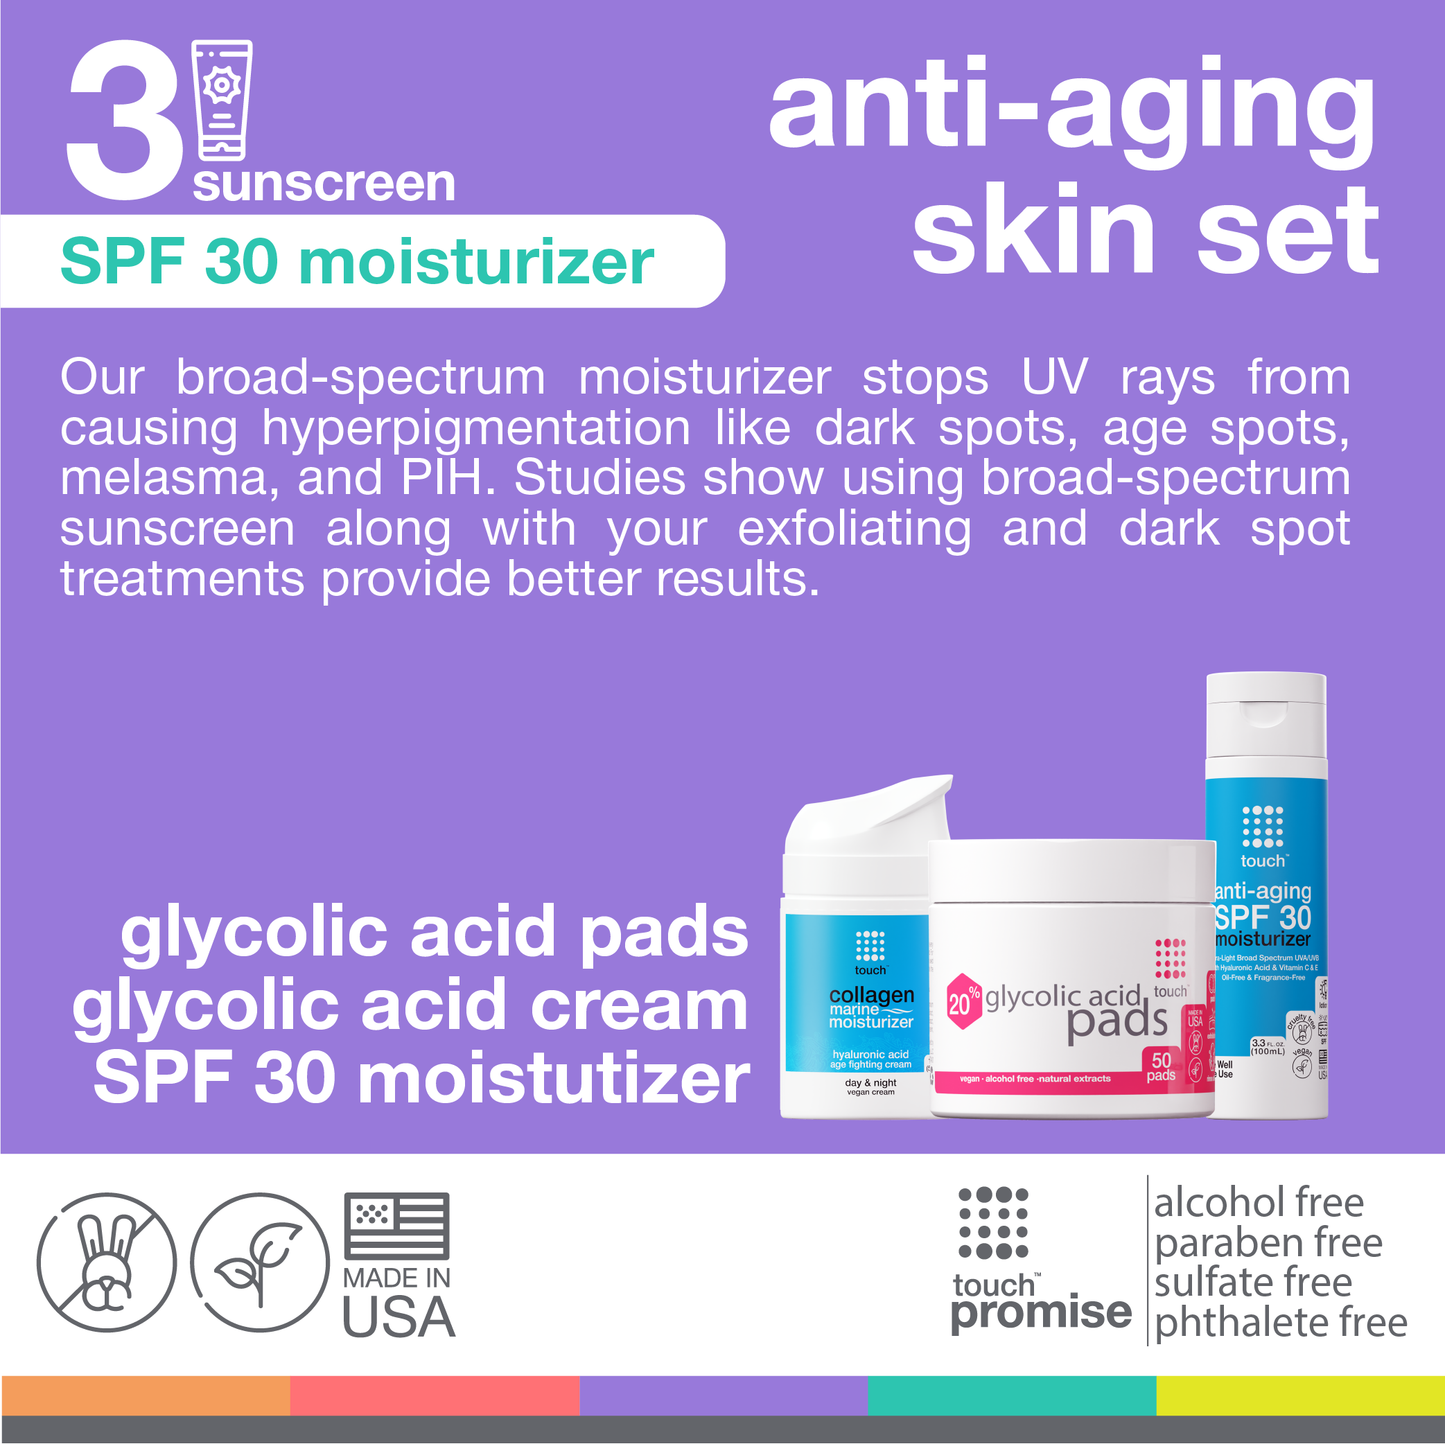 Touch skin care anti aging bundle set